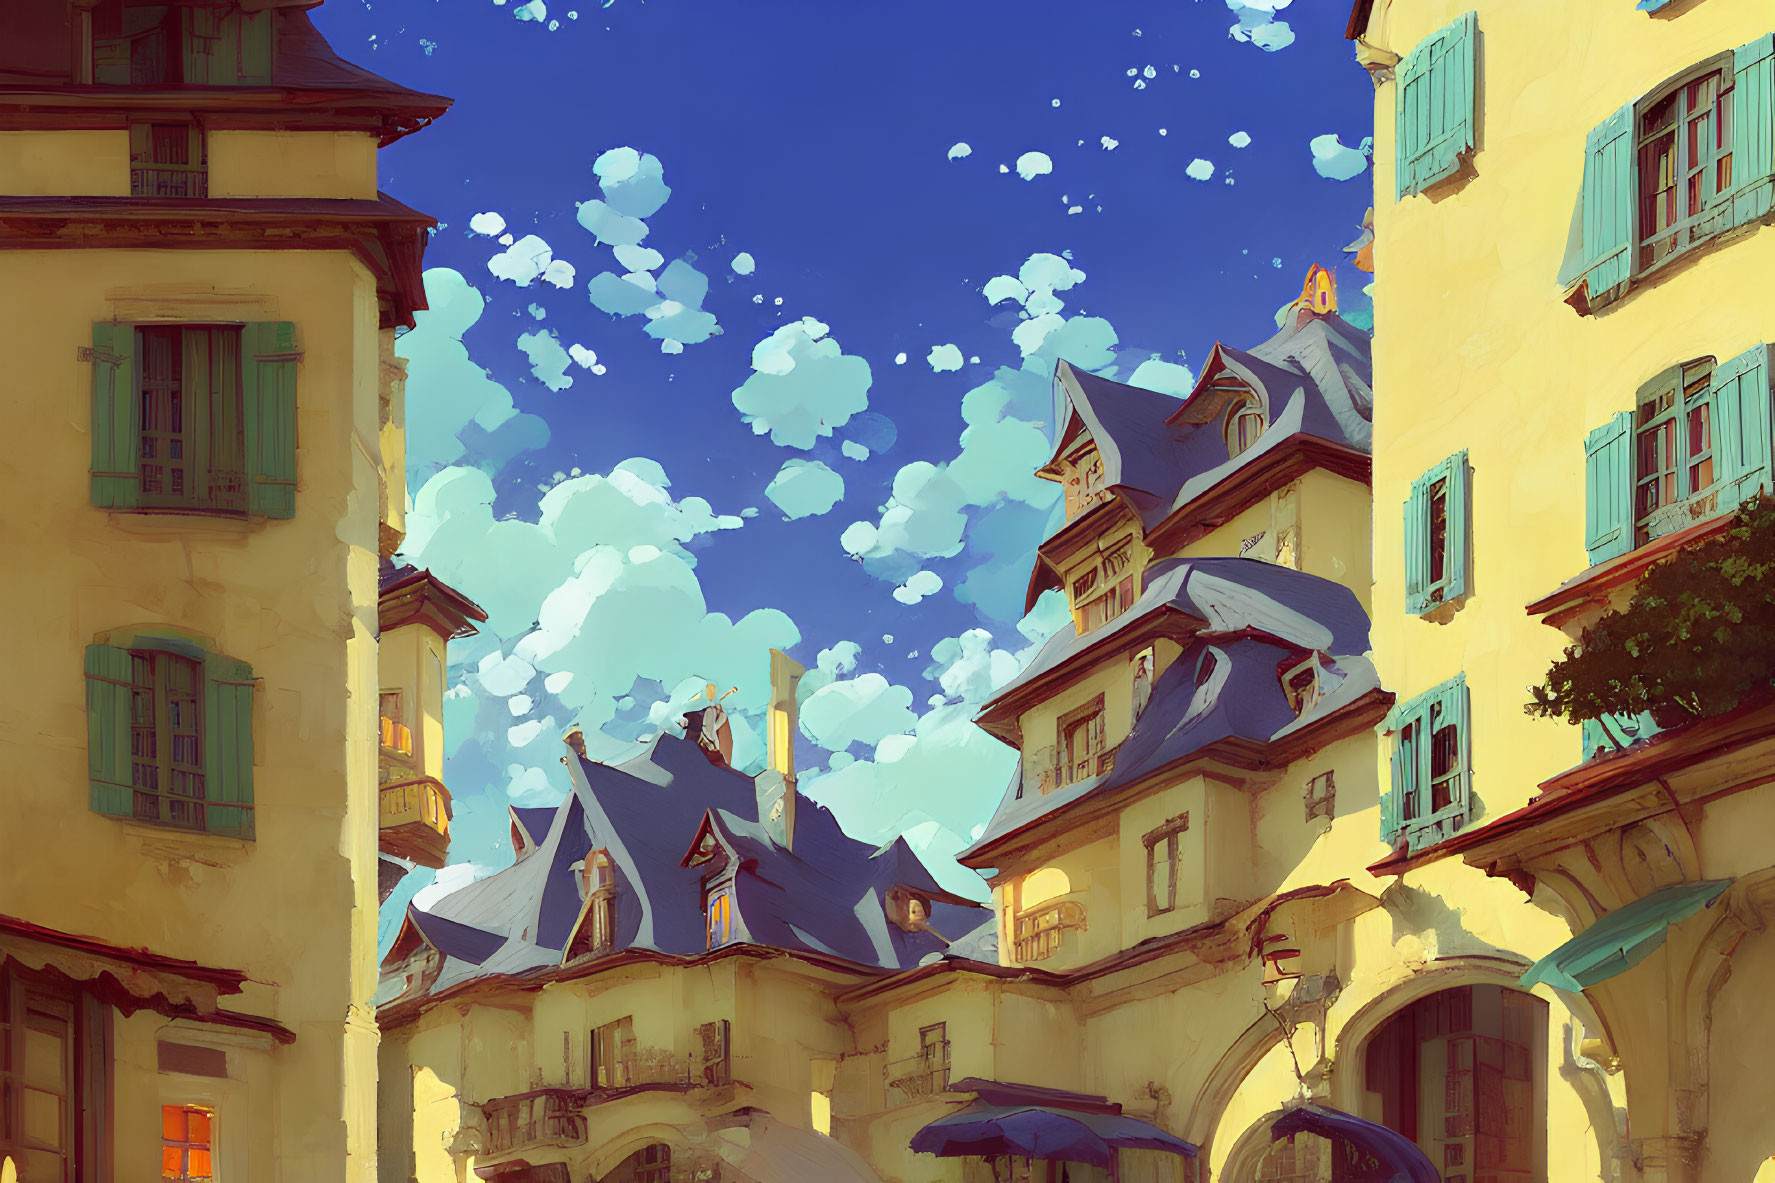 European-style buildings under blue sky with whimsical clouds